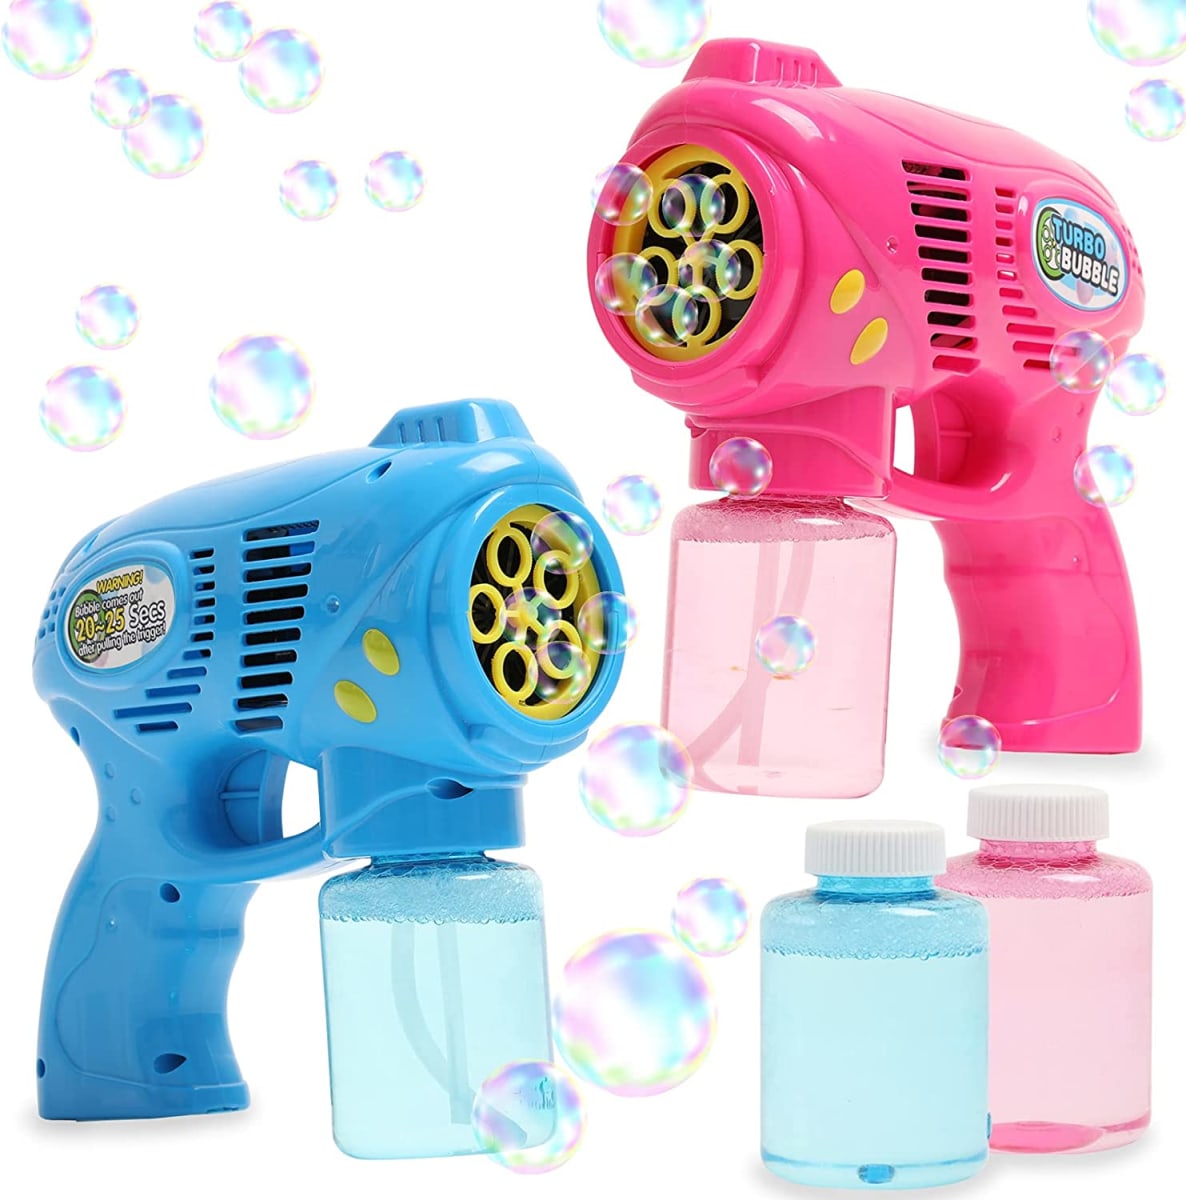 Bubble Guns for Kids and Toddlers, 2 Pack Bubble Gun Blower with Bubble Solution Refill 5 oz Each, Fun Summer Toy Blaster Game for Birthday Party and Wedding, Outdoor Toys for Boys and Girls